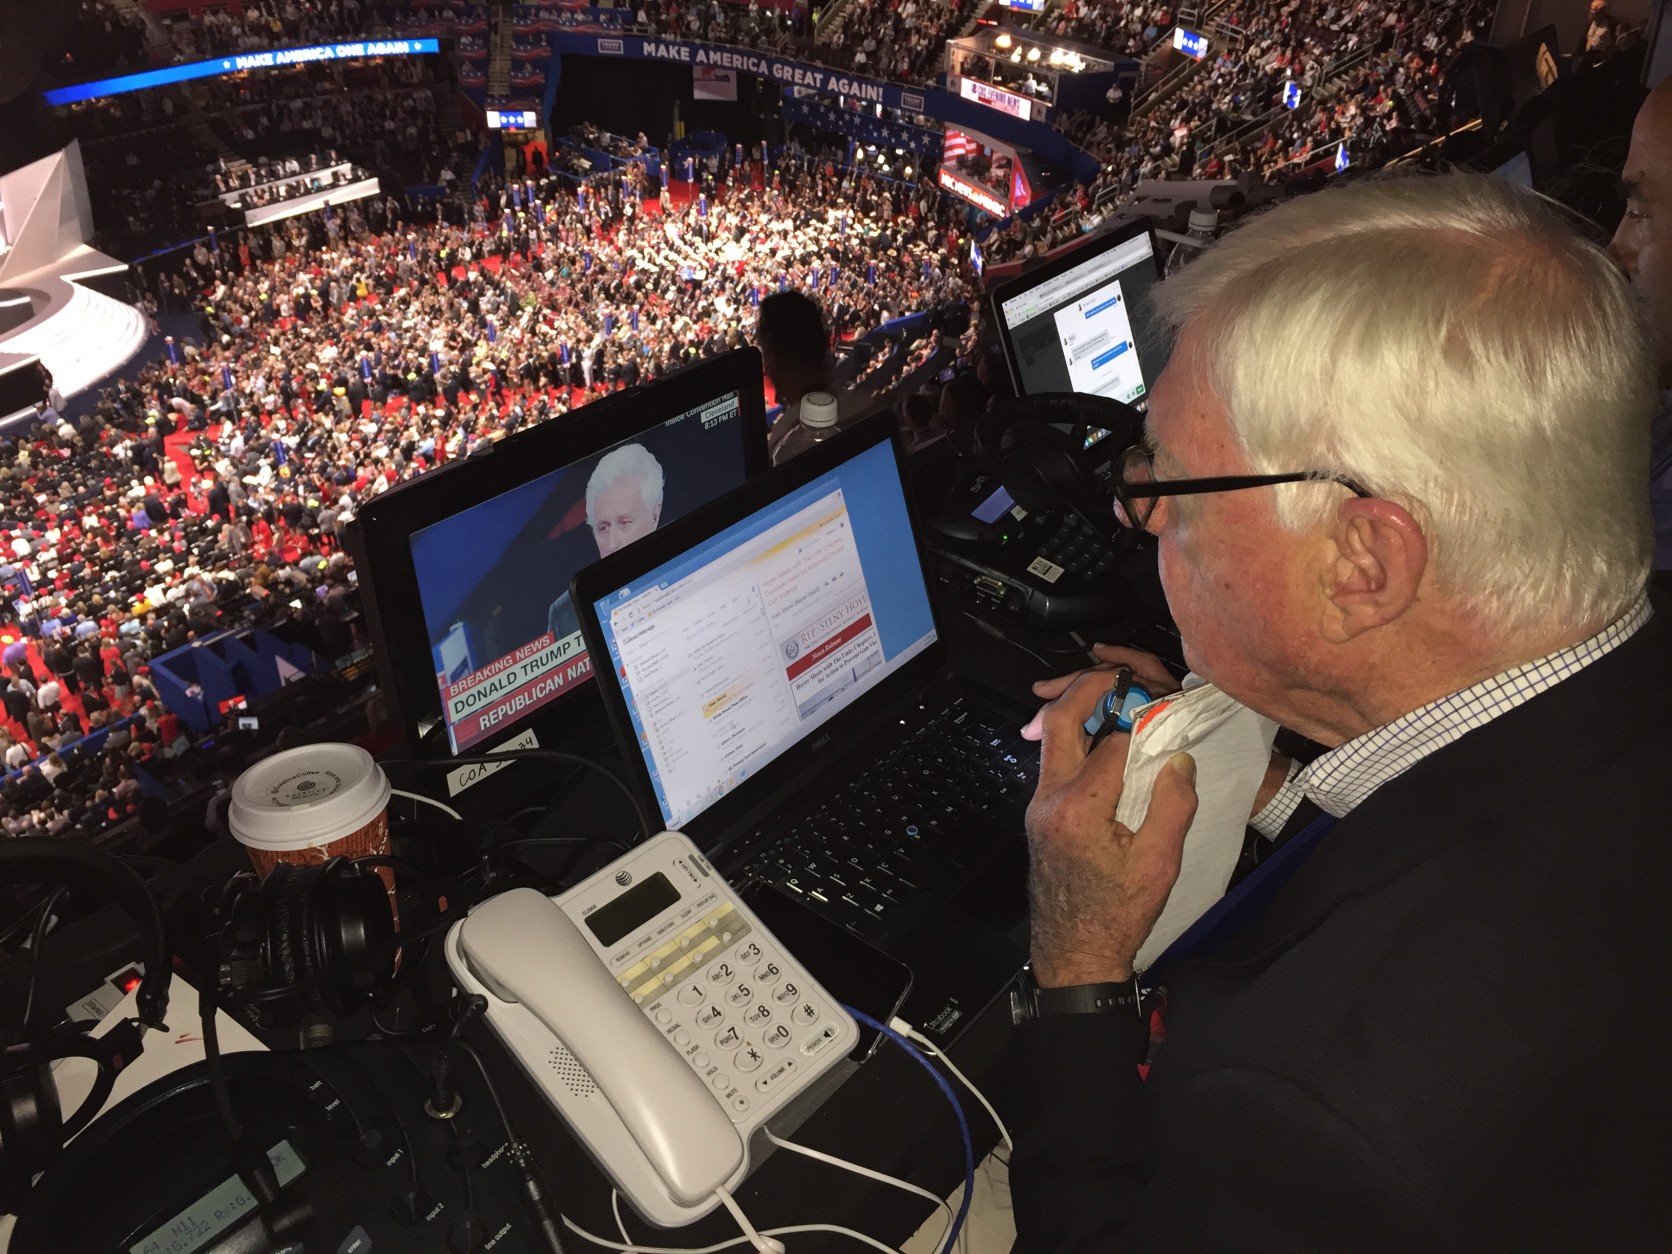 WTOP's Dave McConnell reports live from Cleveland on the final day of the Republican National Convention on Thursday, July 21, 2016. (WTOP/Brennan Haselton)